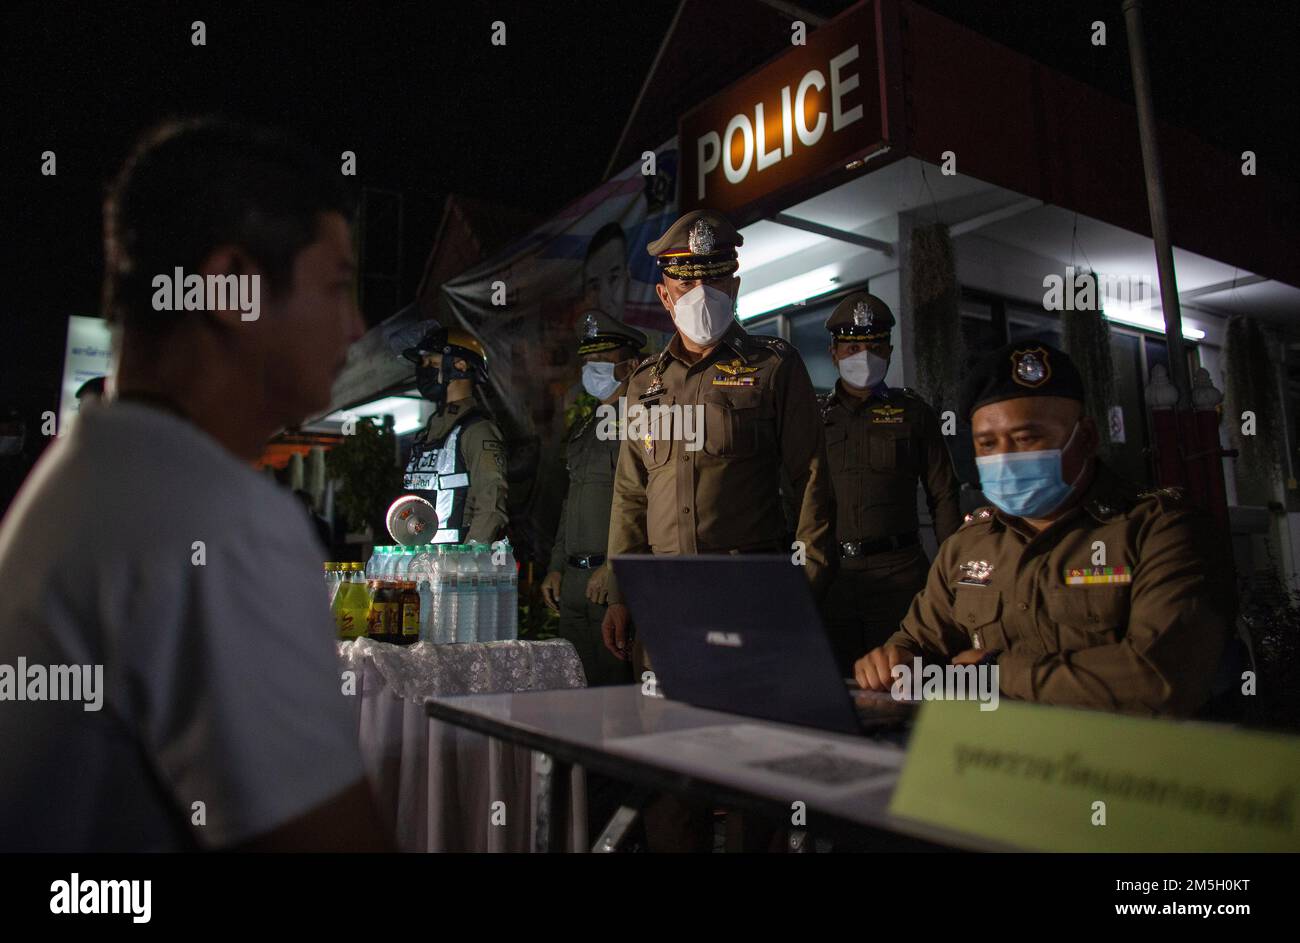 Thai police officers at Check point for alcohol tests via in Chiang Mai. The Center for Prevention and Reduction of Road Accidents has been established during the New Year's Festival 2023, the 7-day intensive control period from 29 December 2022 to 4 January 2023. More than 50,000 police officers are to set up checkpoints to facilitate traffic laws and take care of the safety of people. They will work throughout the festival without holidays, focusing on 4 charges according to government policy: driving while intoxicated, driving too fast, and not wearing a helmet. and a seat belt. In this reg Stock Photo